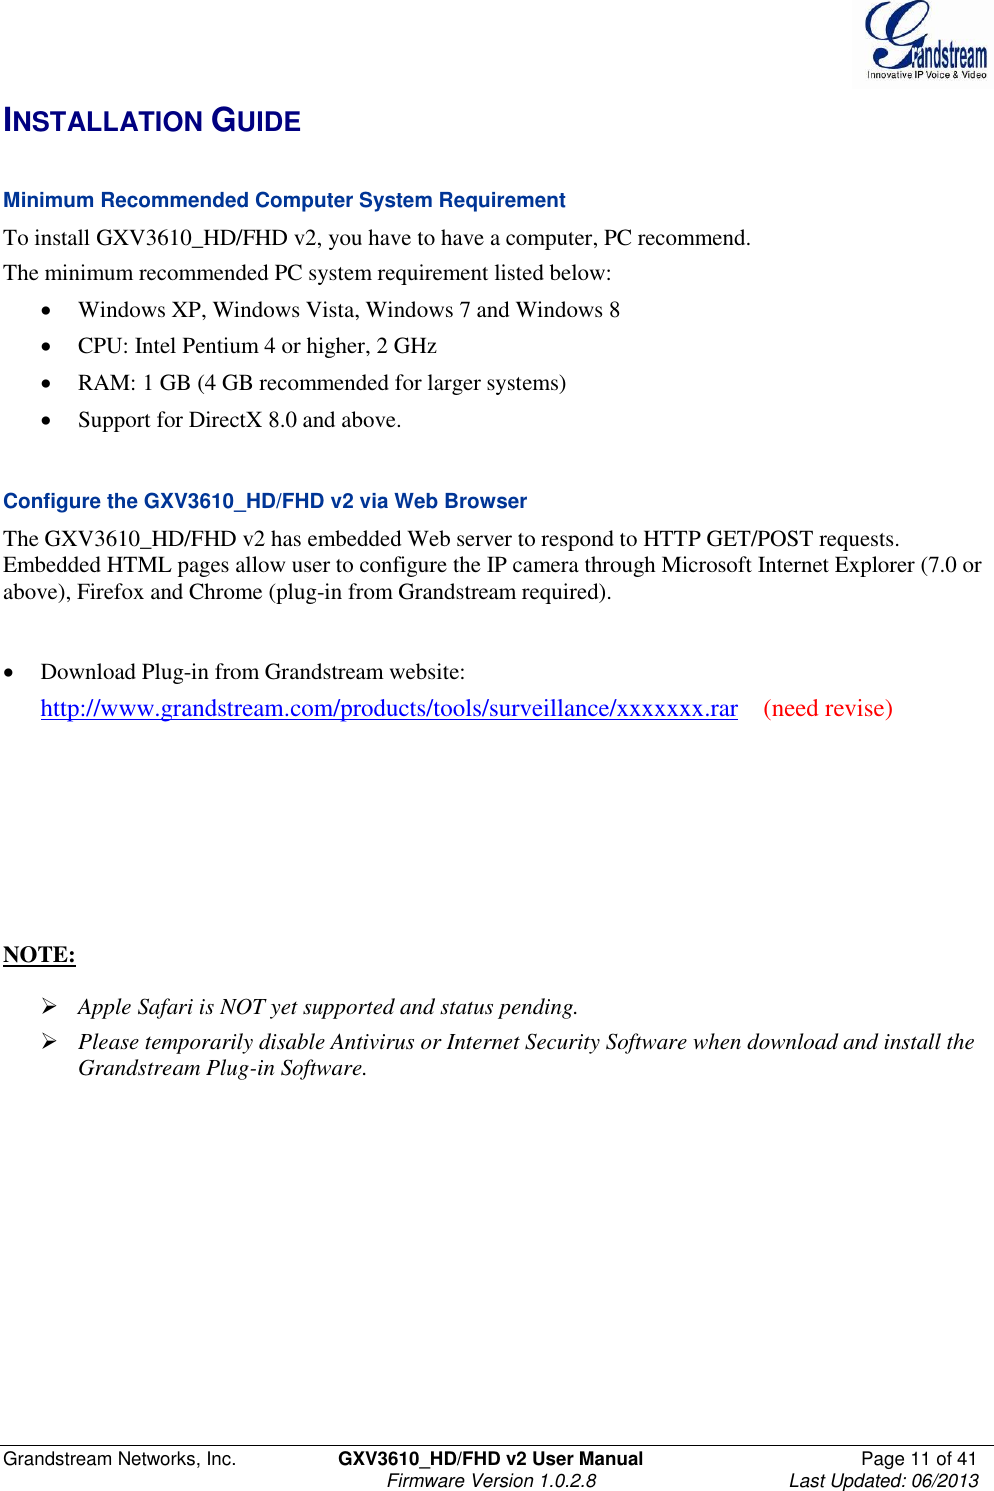  Grandstream Networks, Inc.  GXV3610_HD/FHD v2 User Manual  Page 11 of 41    Firmware Version 1.0.2.8  Last Updated: 06/2013  INSTALLATION GUIDE  Minimum Recommended Computer System Requirement To install GXV3610_HD/FHD v2, you have to have a computer, PC recommend.  The minimum recommended PC system requirement listed below:   Windows XP, Windows Vista, Windows 7 and Windows 8   CPU: Intel Pentium 4 or higher, 2 GHz  RAM: 1 GB (4 GB recommended for larger systems)  Support for DirectX 8.0 and above.    Configure the GXV3610_HD/FHD v2 via Web Browser The GXV3610_HD/FHD v2 has embedded Web server to respond to HTTP GET/POST requests. Embedded HTML pages allow user to configure the IP camera through Microsoft Internet Explorer (7.0 or above), Firefox and Chrome (plug-in from Grandstream required).     Download Plug-in from Grandstream website:  http://www.grandstream.com/products/tools/surveillance/xxxxxxx.rar    (need revise)         NOTE:    Apple Safari is NOT yet supported and status pending.   Please temporarily disable Antivirus or Internet Security Software when download and install the Grandstream Plug-in Software.   